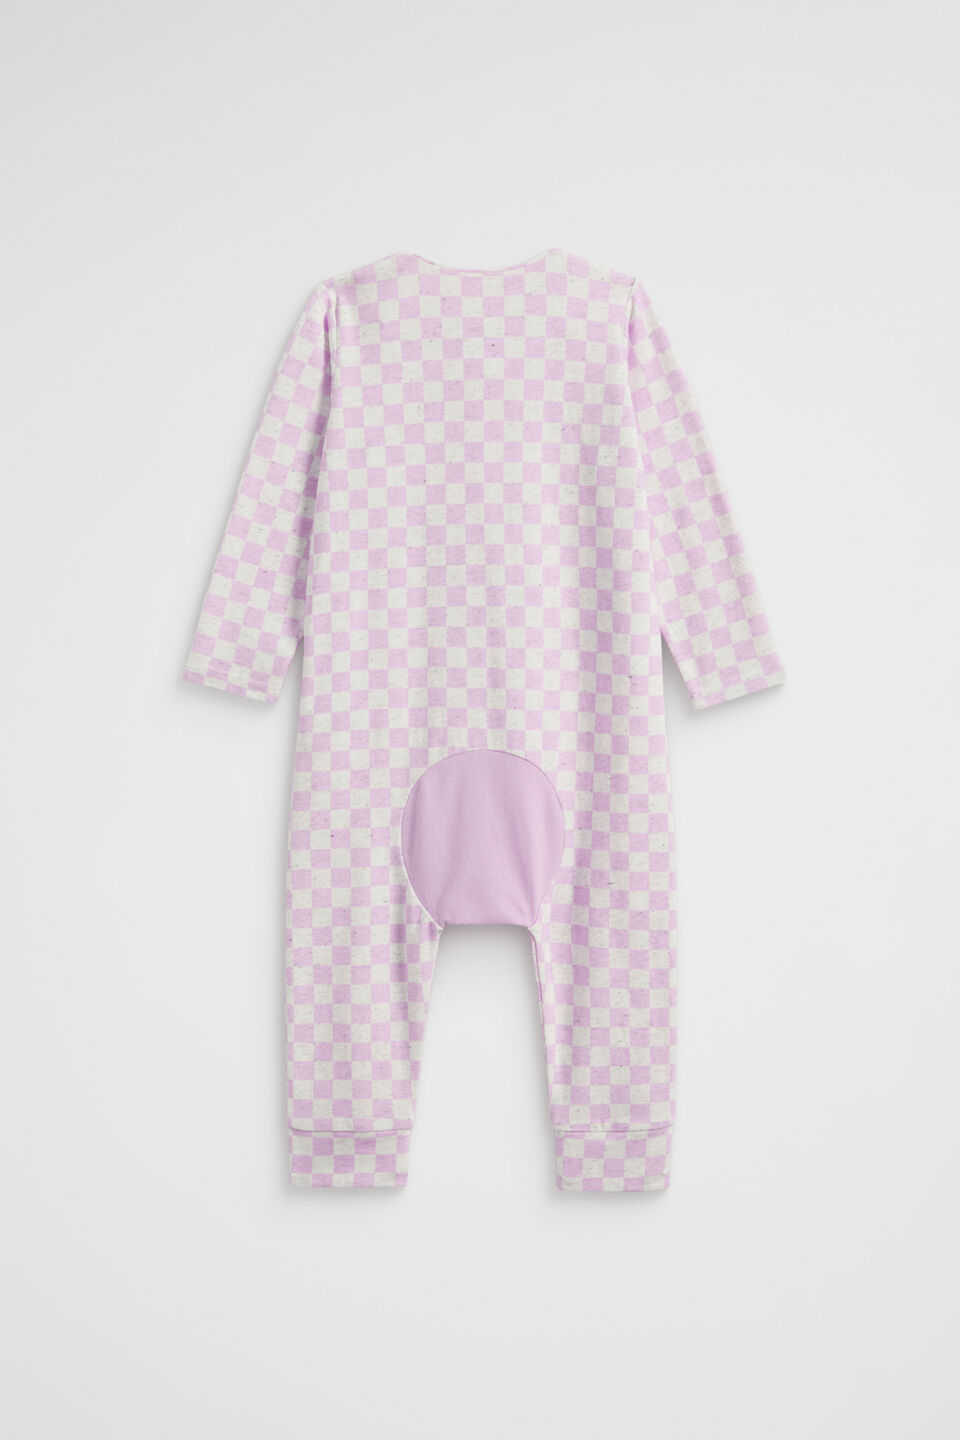 Checkerboard Zipsuit  Lilac